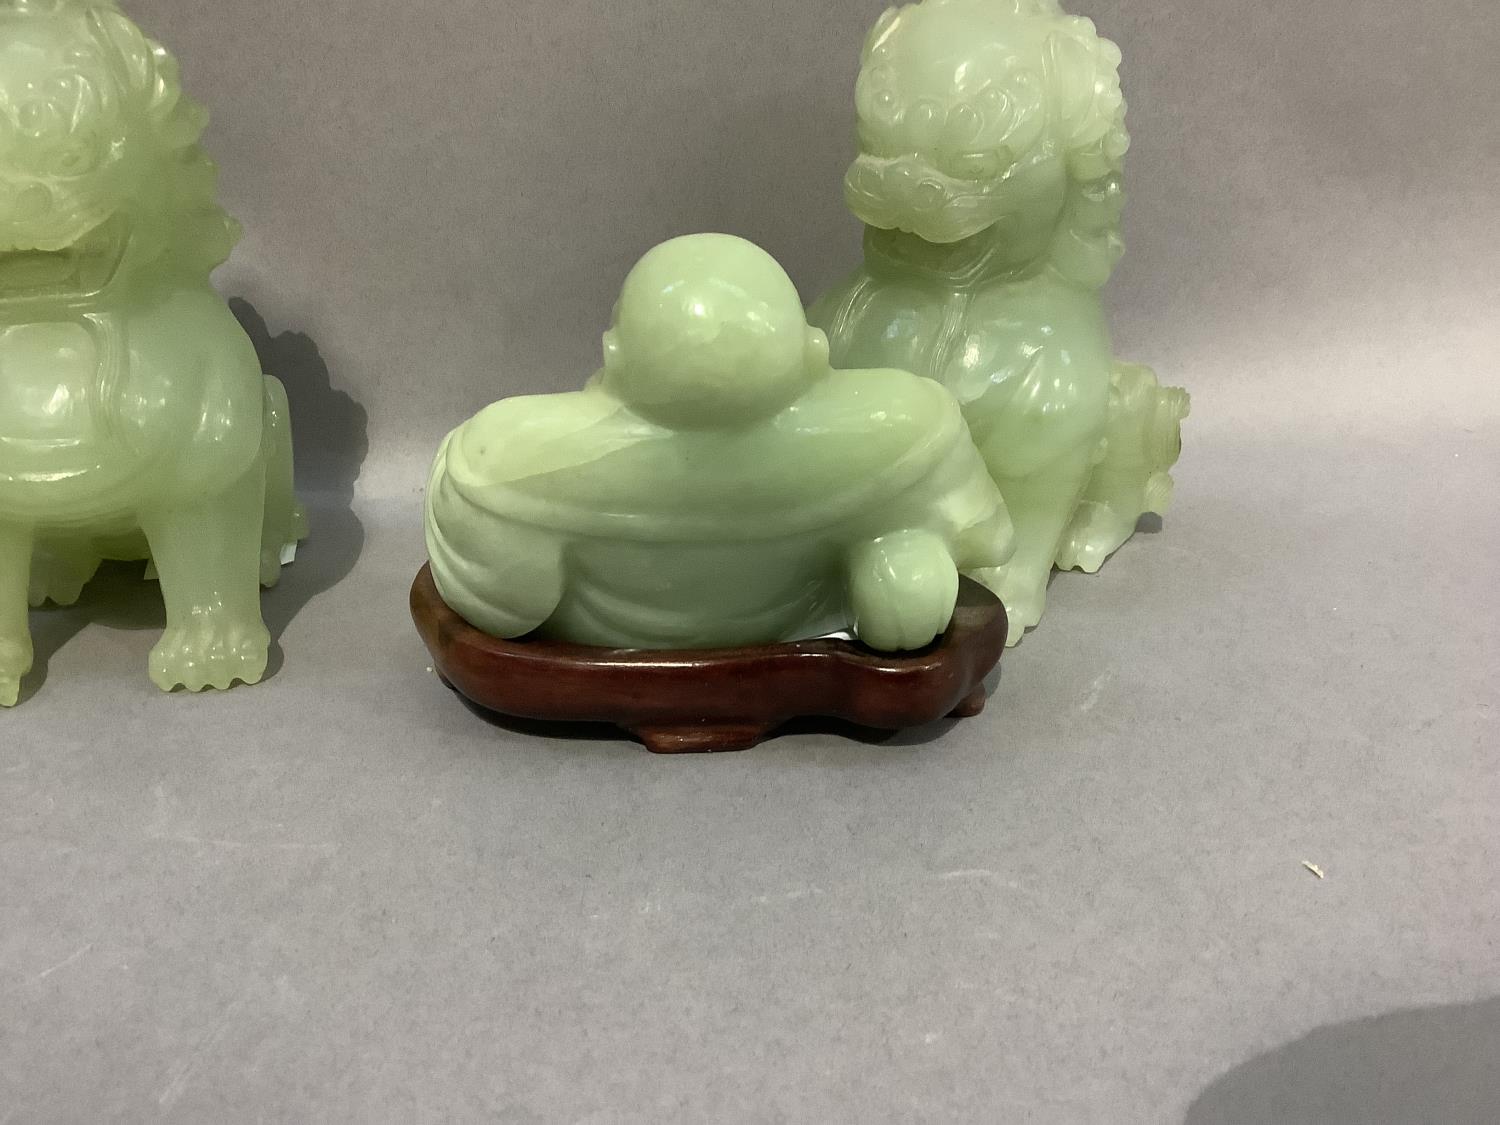 A pair of Chinese jade effect lion dogs together with a carving of Buddha in a jade like hard stone, - Image 3 of 3